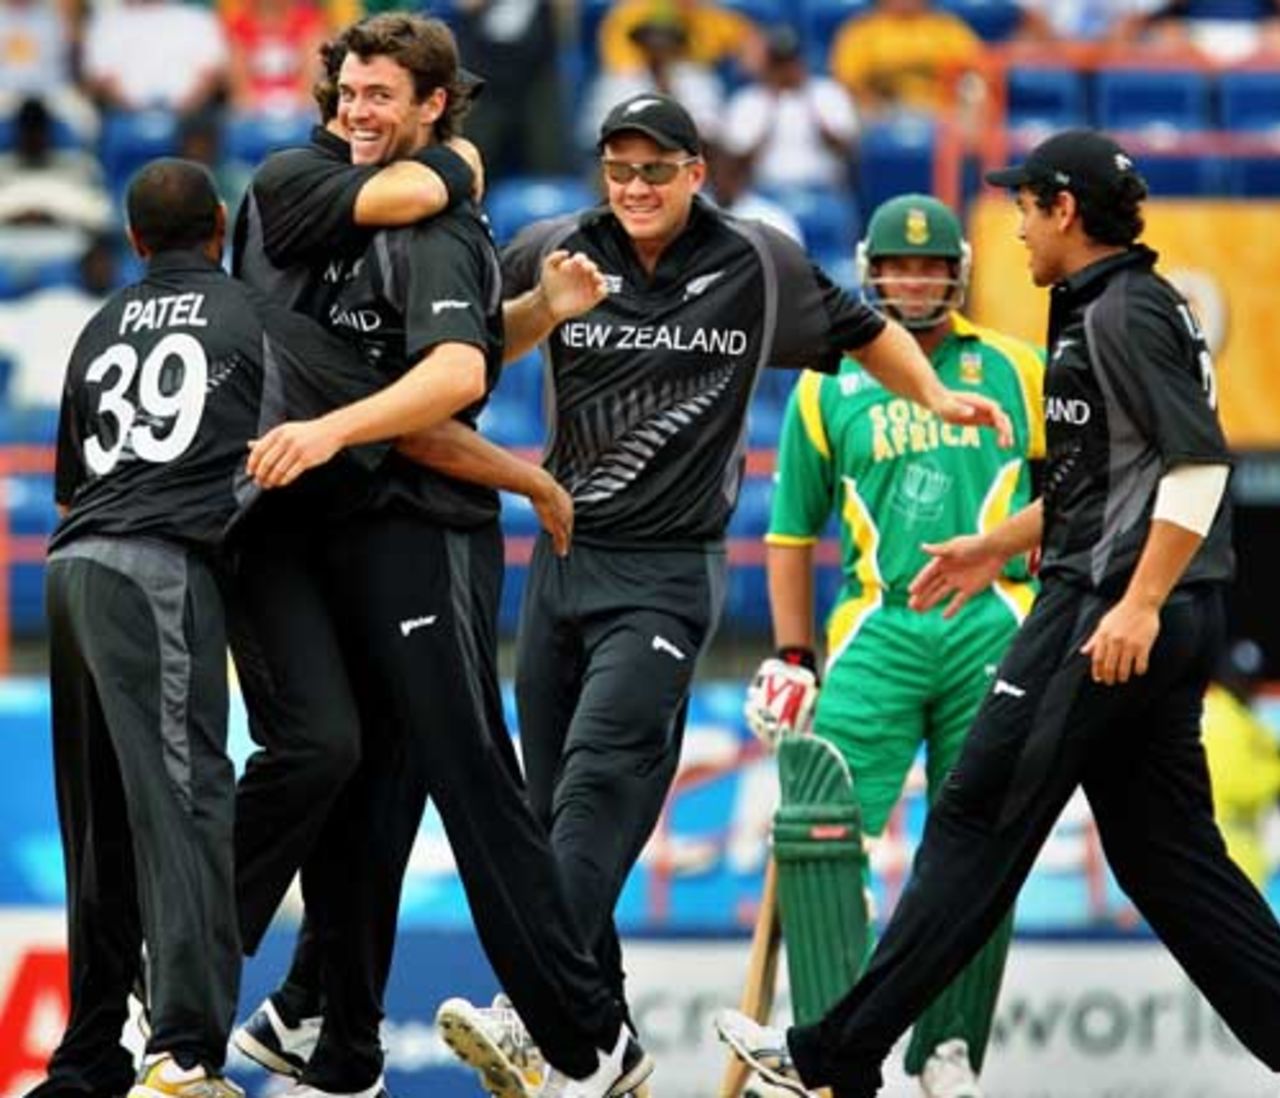 James Franklin celebrates with team-mates as South Africa lose their second wicket, New Zealand v South Africa, Super Eights, Grenada, April 14, 2007